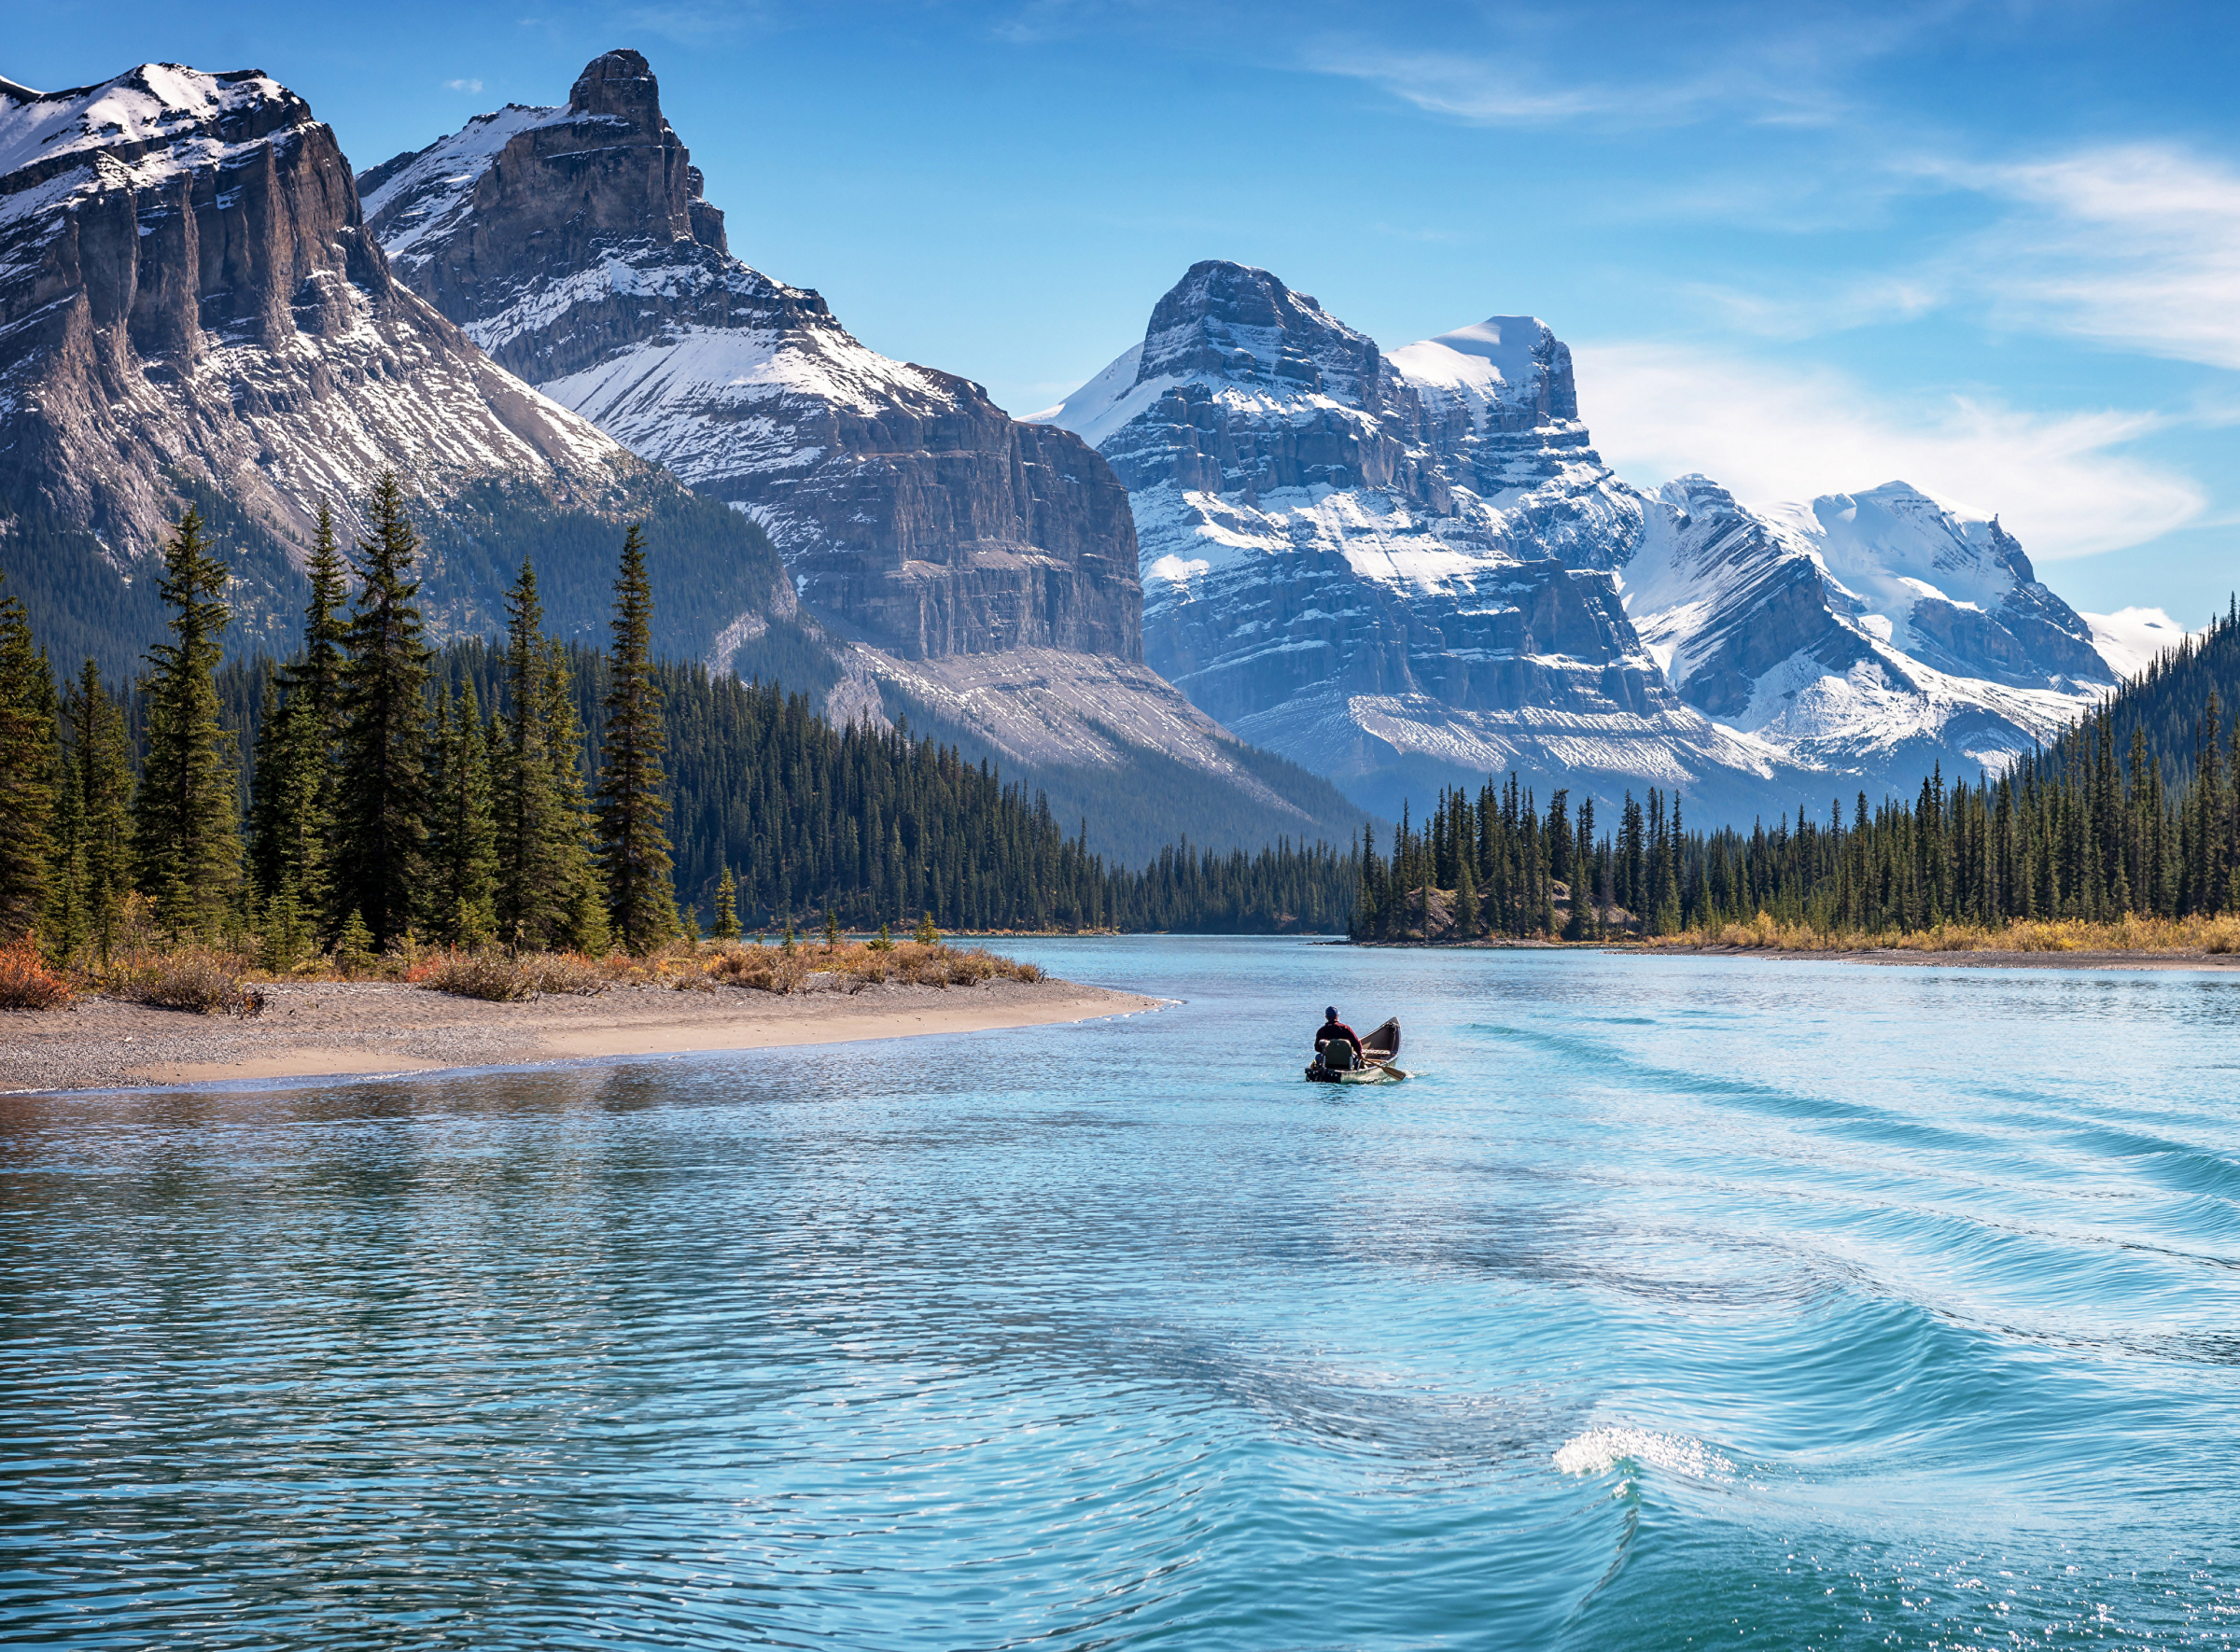 Jasper National Park: Complete Guide to Canada’s Rocky Mountains